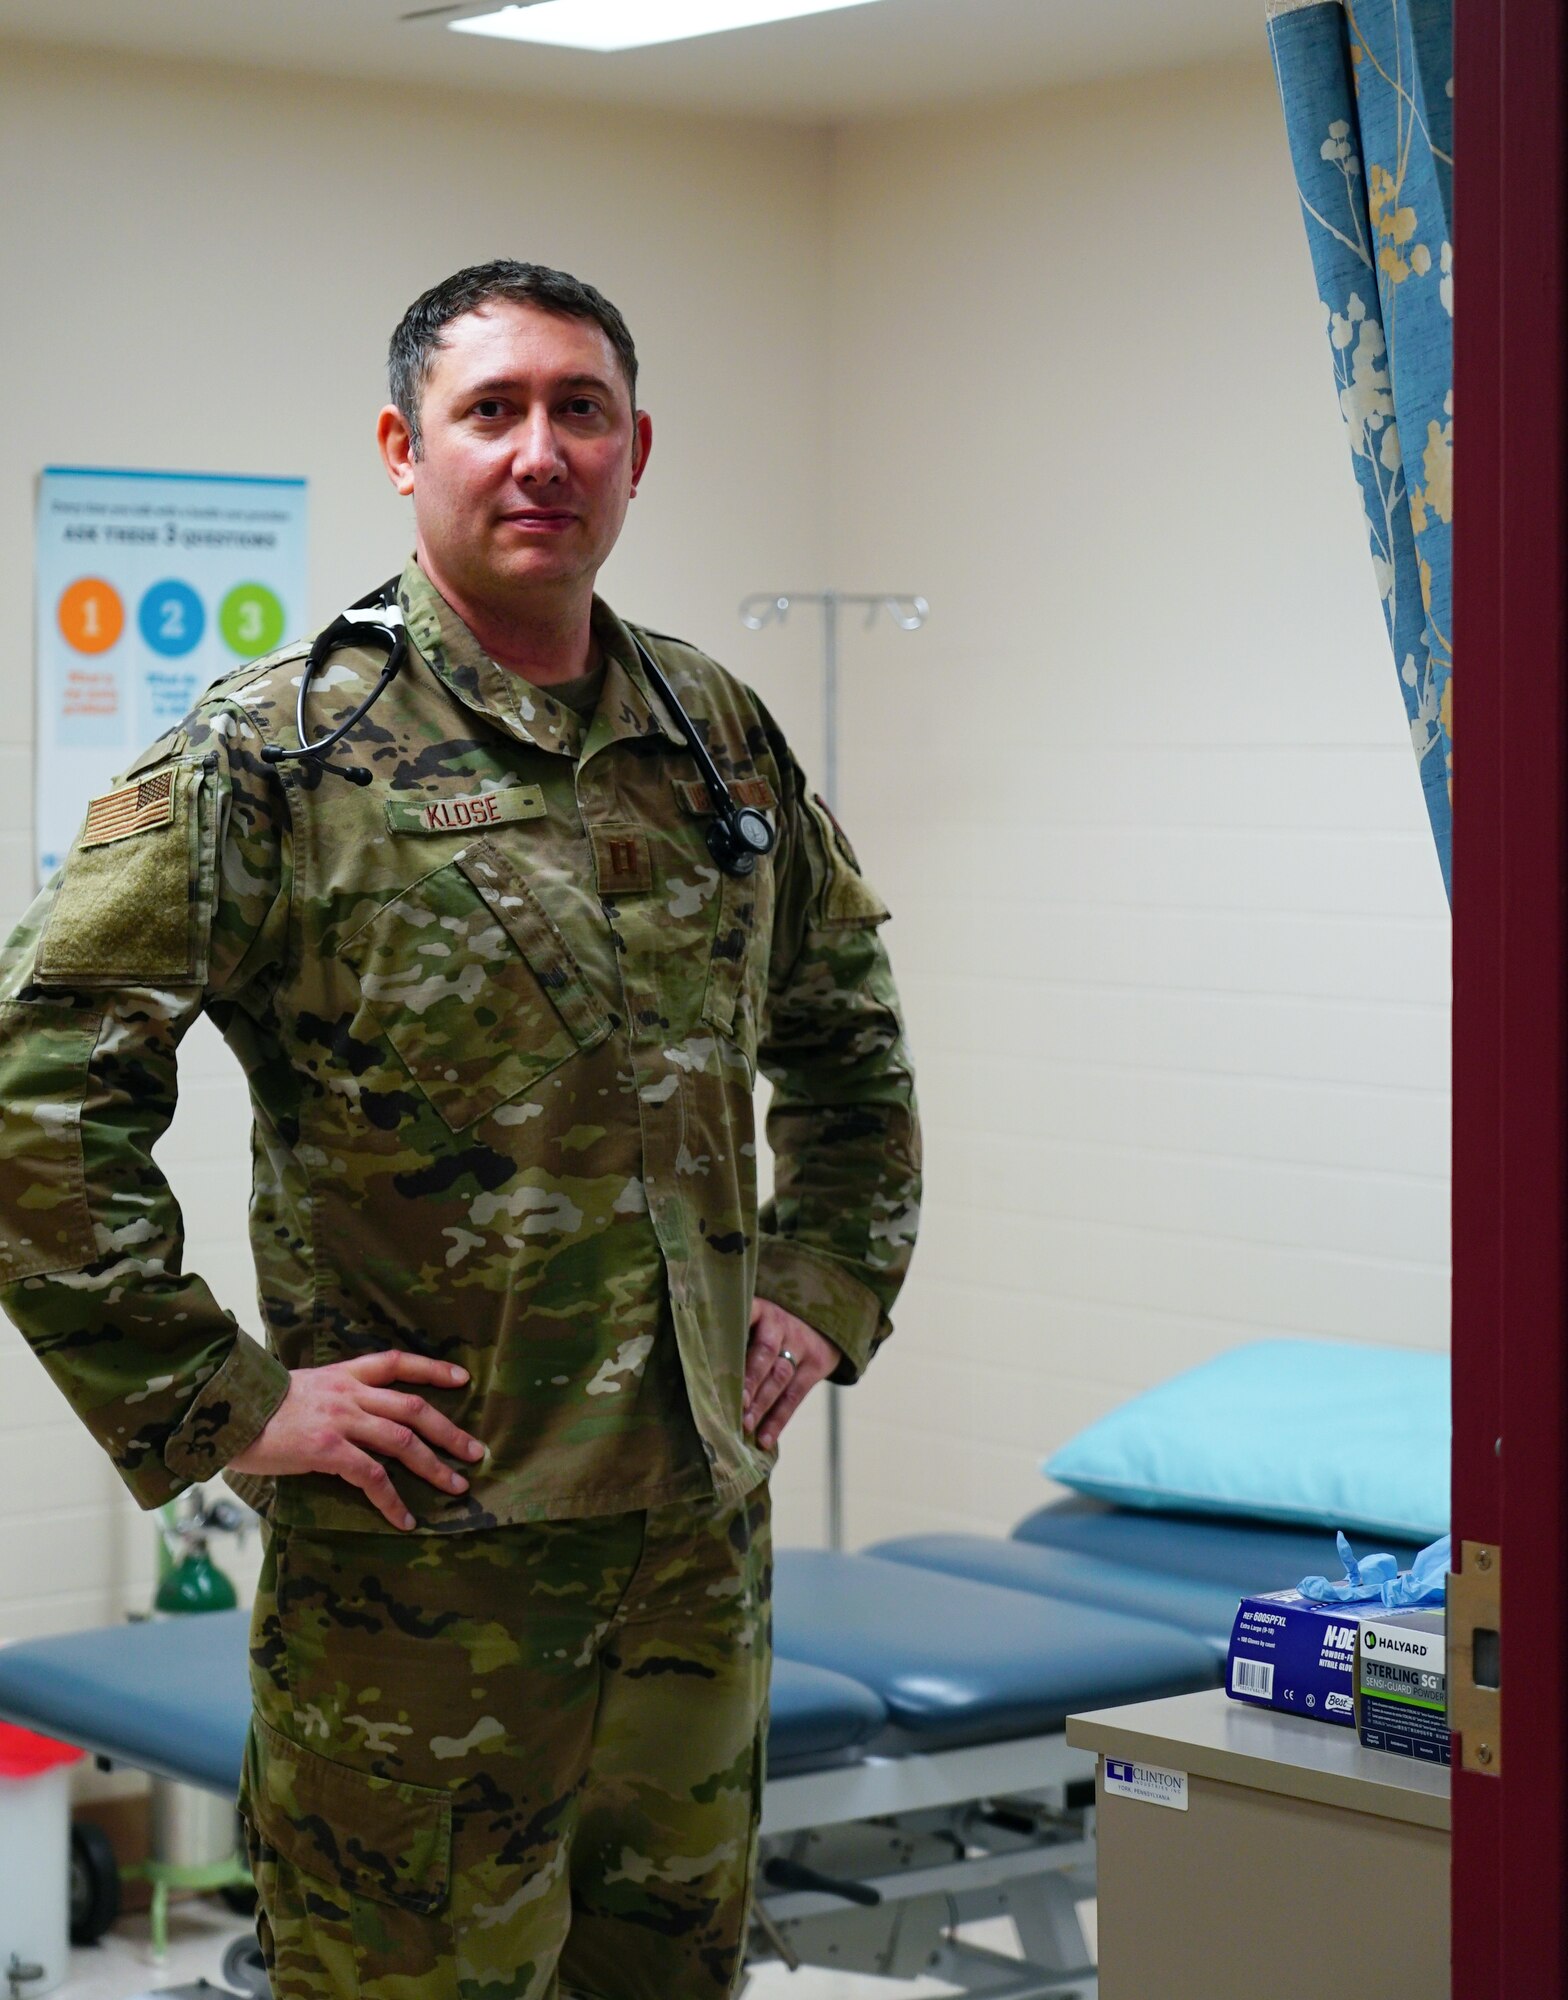 Capt. Michael Klose, 319th Medical Operations Squadron physician assistant, poses for a photo to display a patient intake room at Grand Forks Air Force Base, N.D., Jan. 21, 2021. Physician assistants help maintain the health and wellness of the Air Force by treating  Airmen and their families.